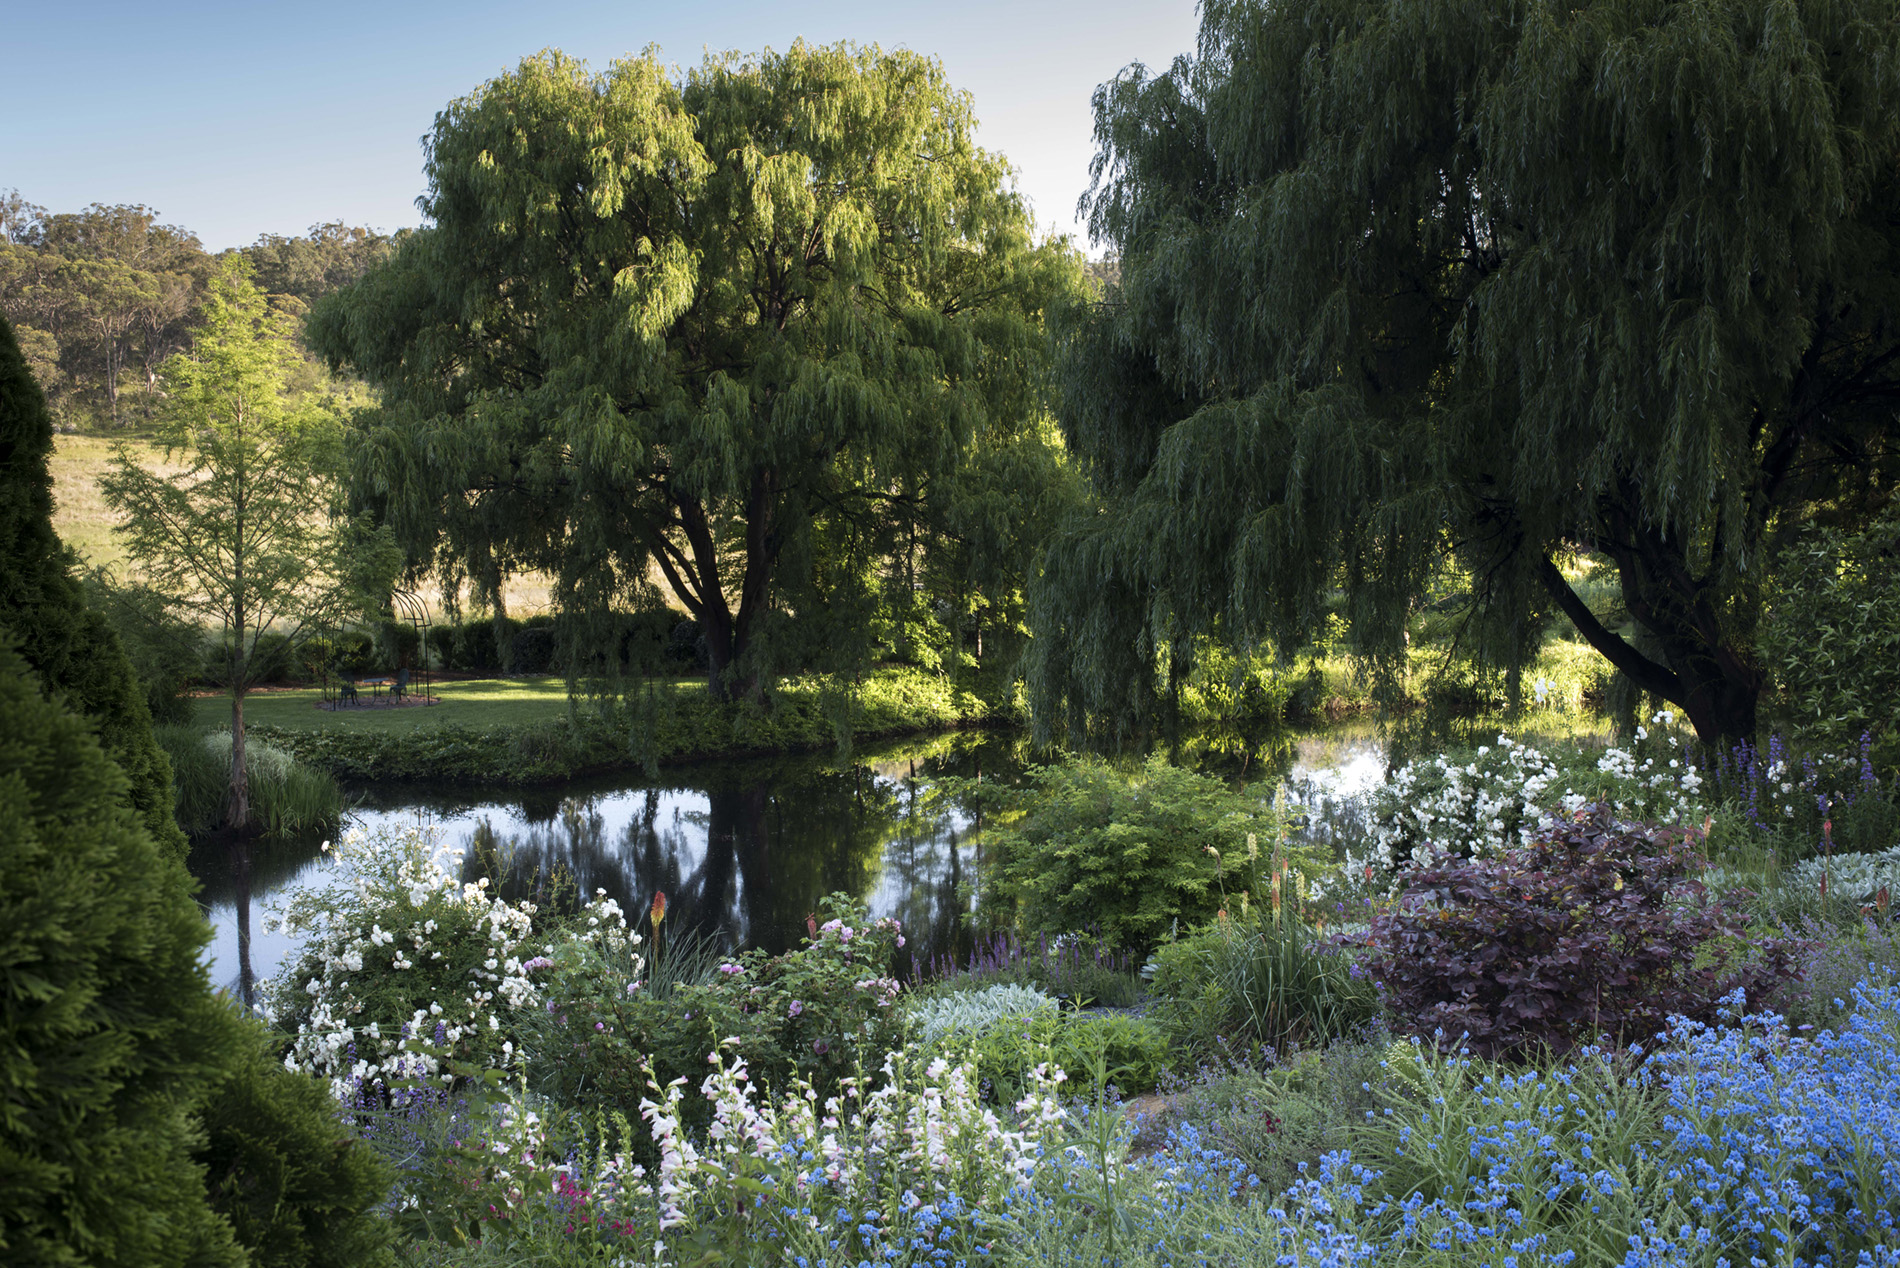 A photograph of a garden. Flowers and a lake sit in the foreground, with lush green grass backing onto a dry paddock in the background.